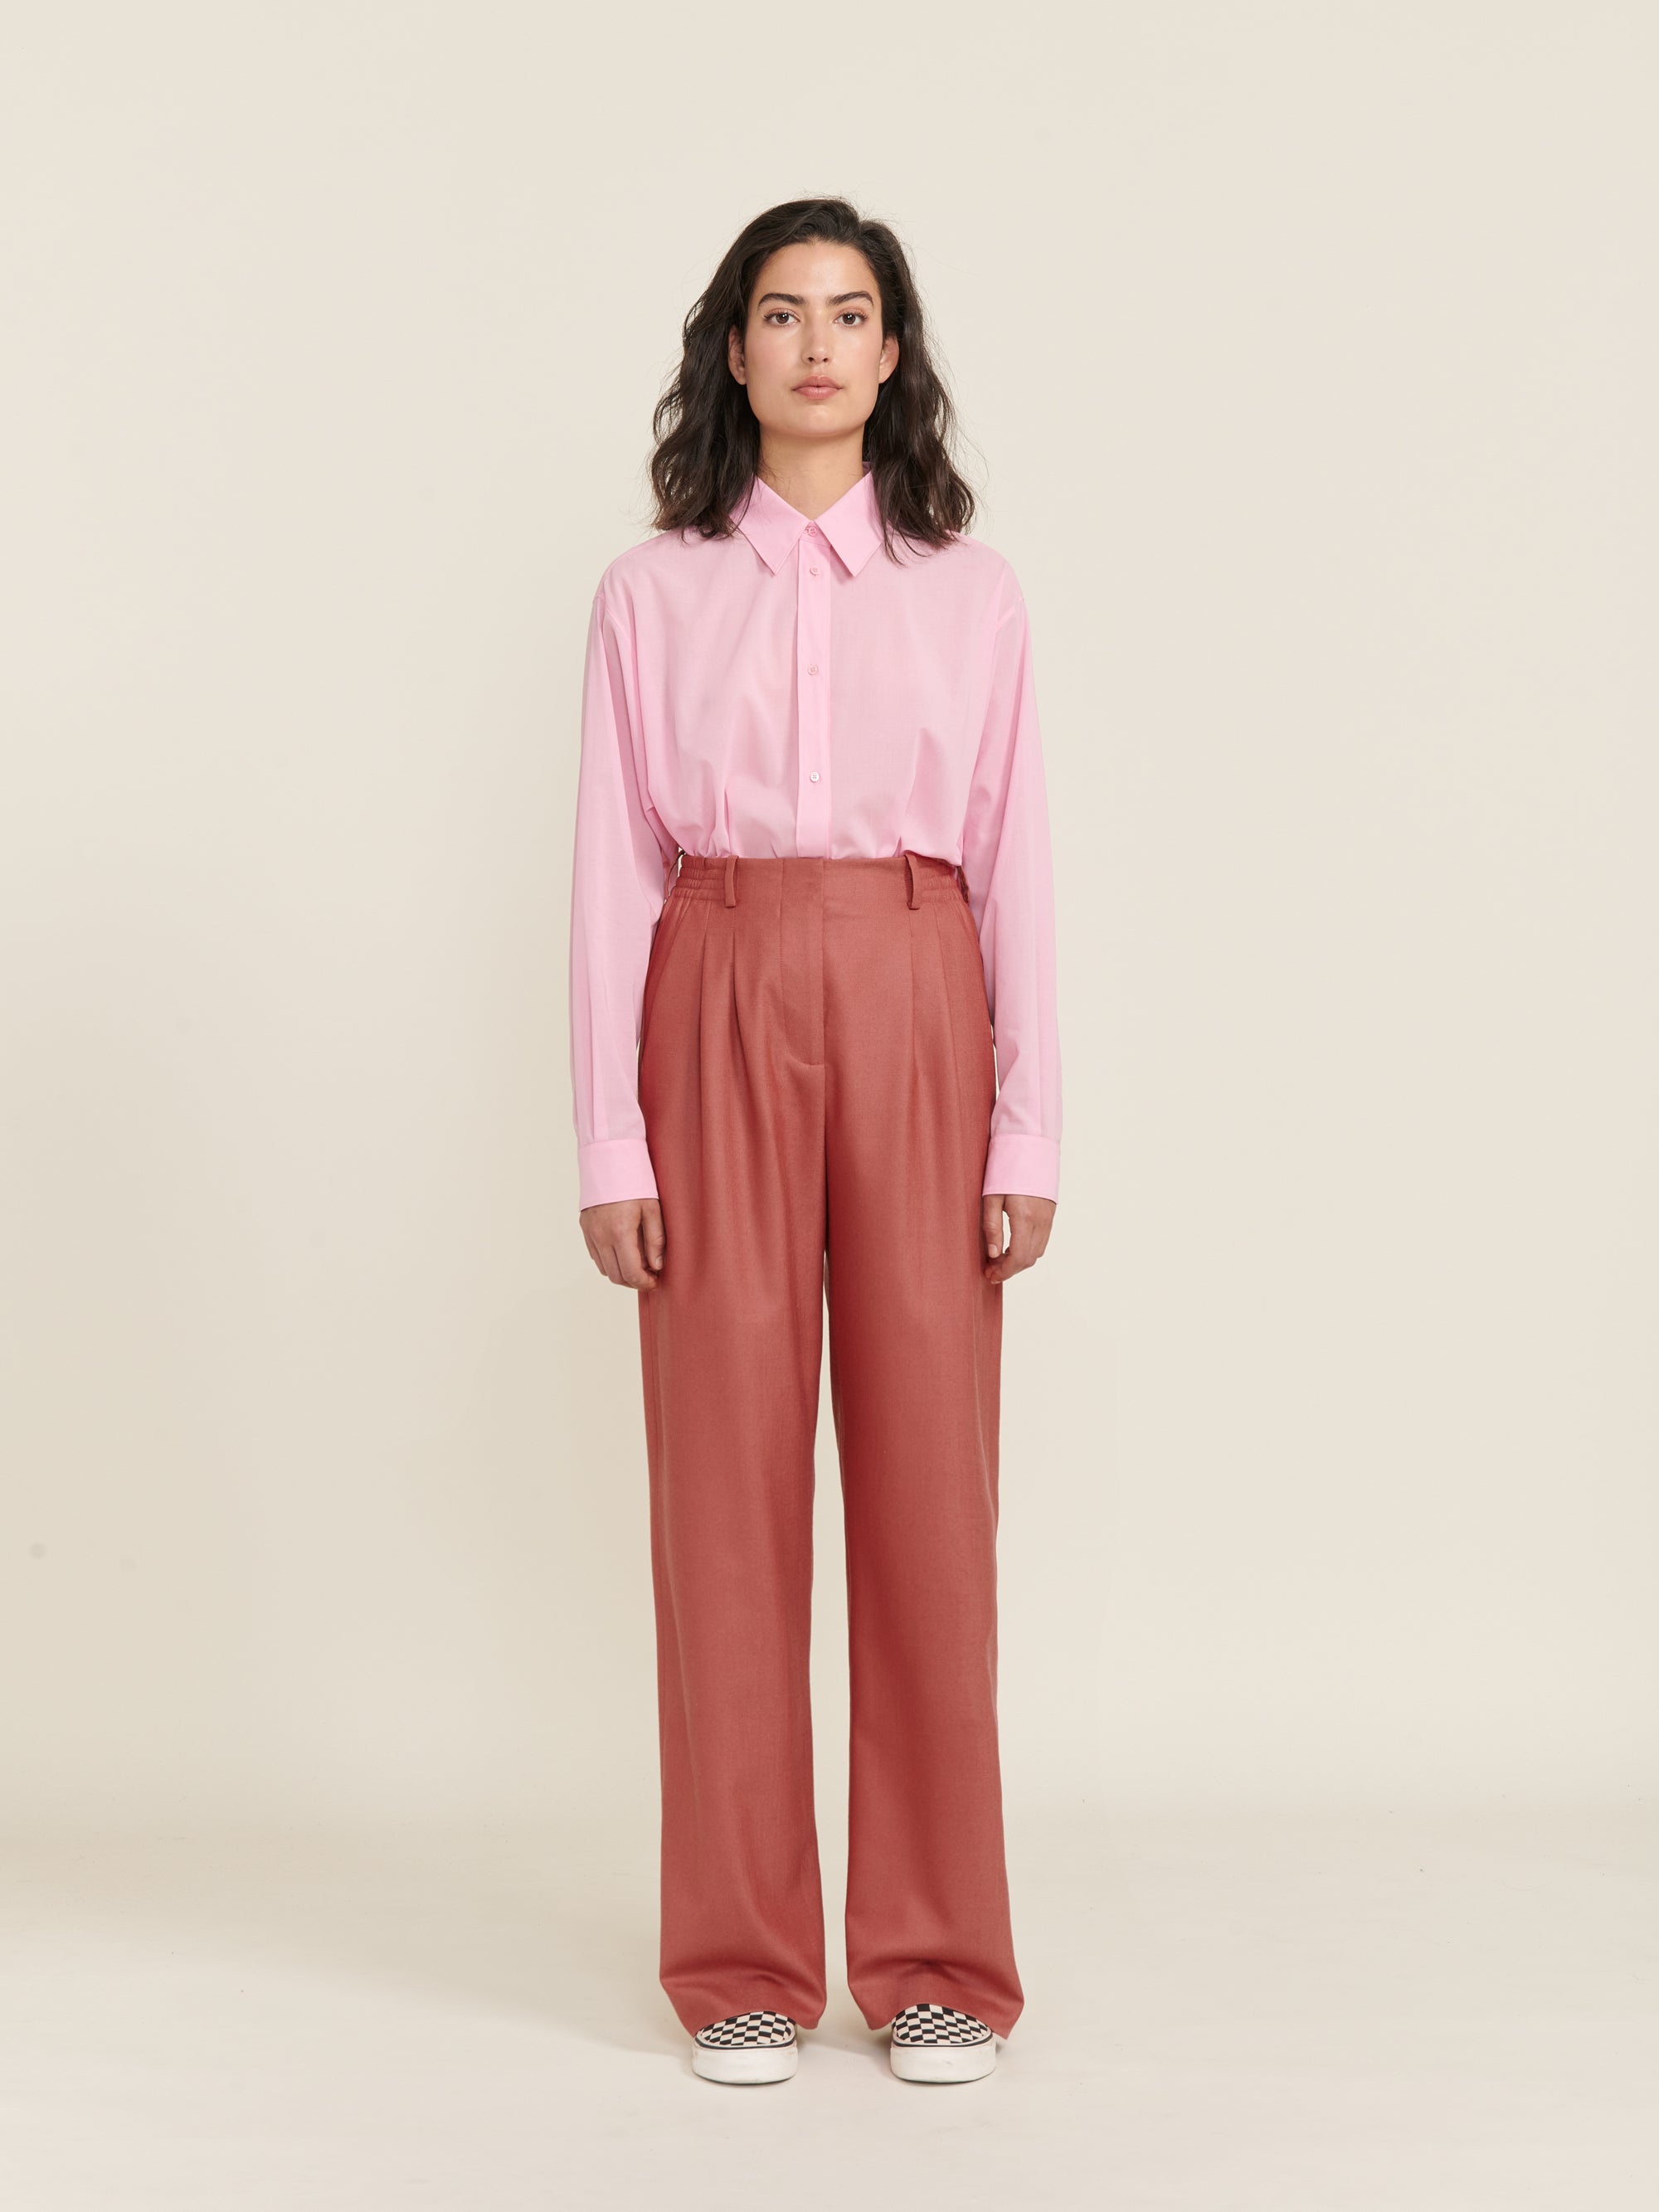 P168_FLANELLE_PINK_066